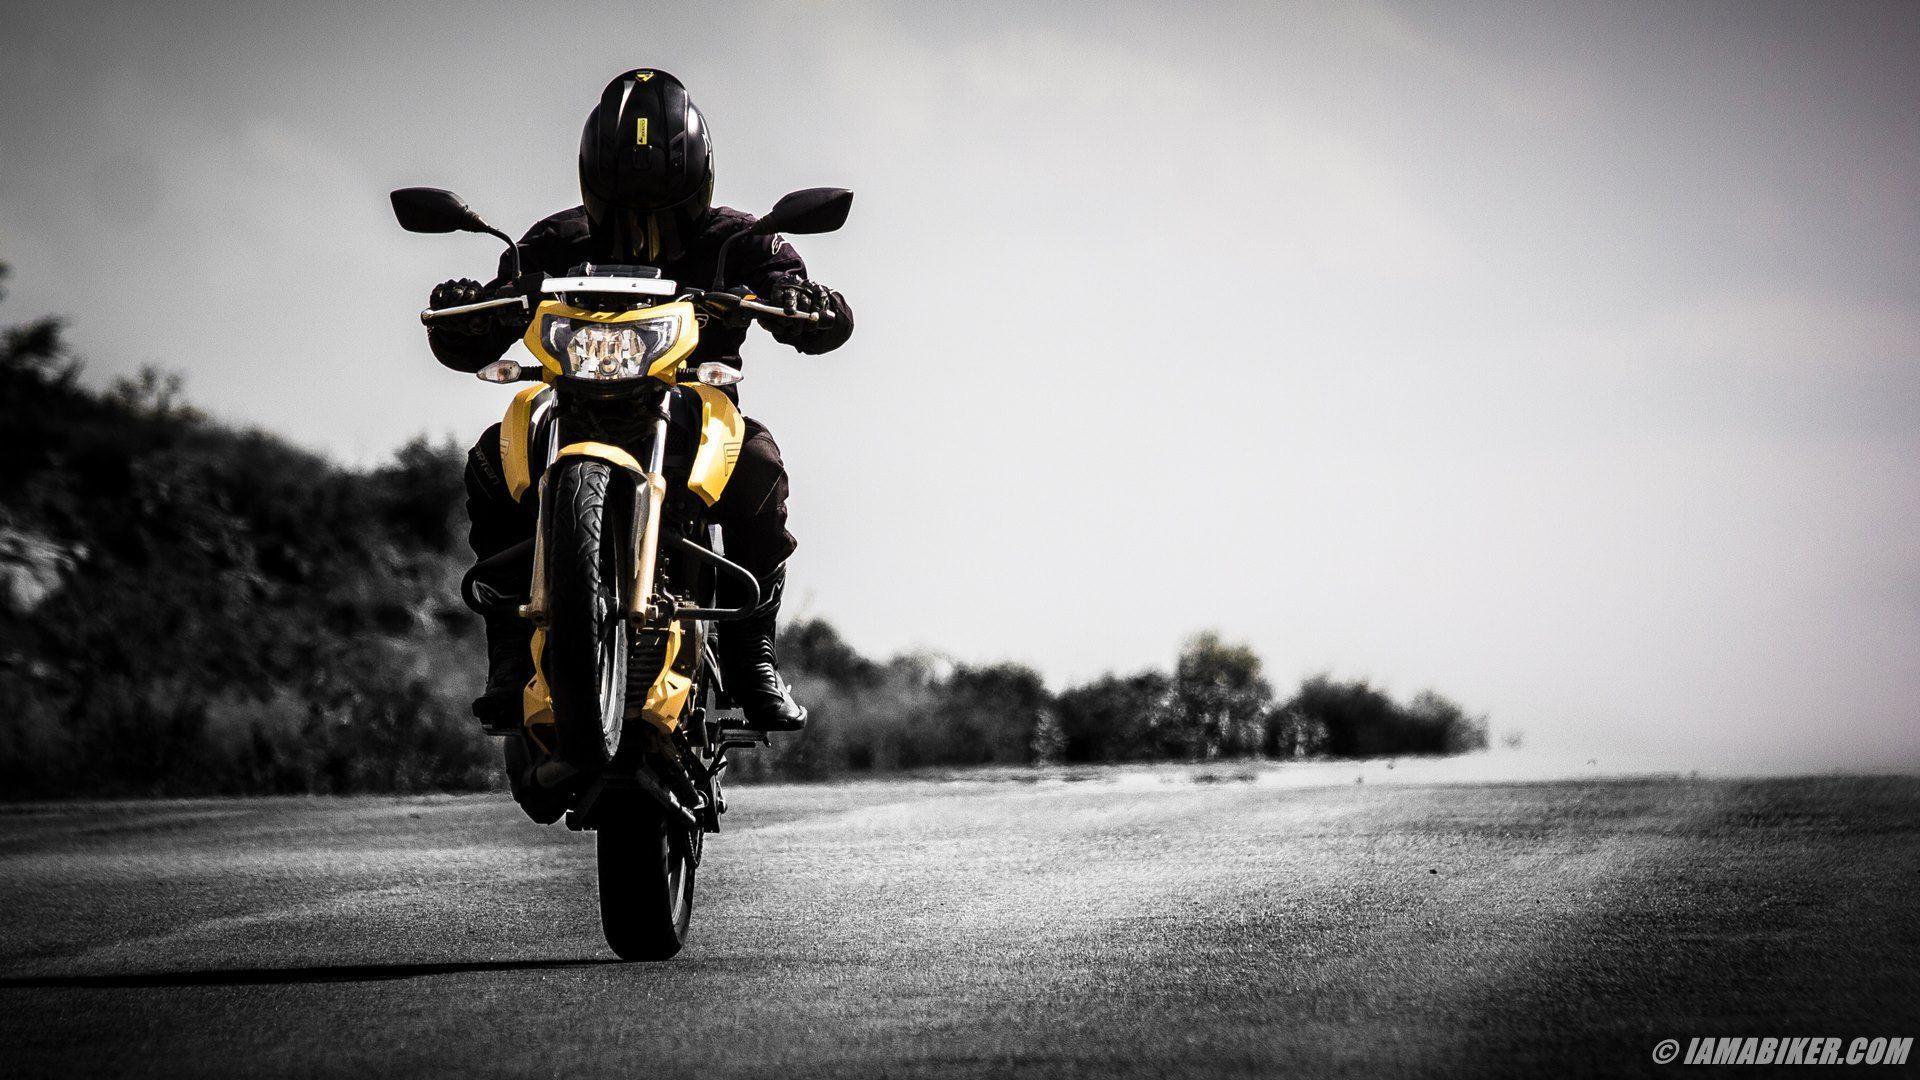 Apache RTR 200 HD wallpaper. Awesomest Vehicles In The WORLD